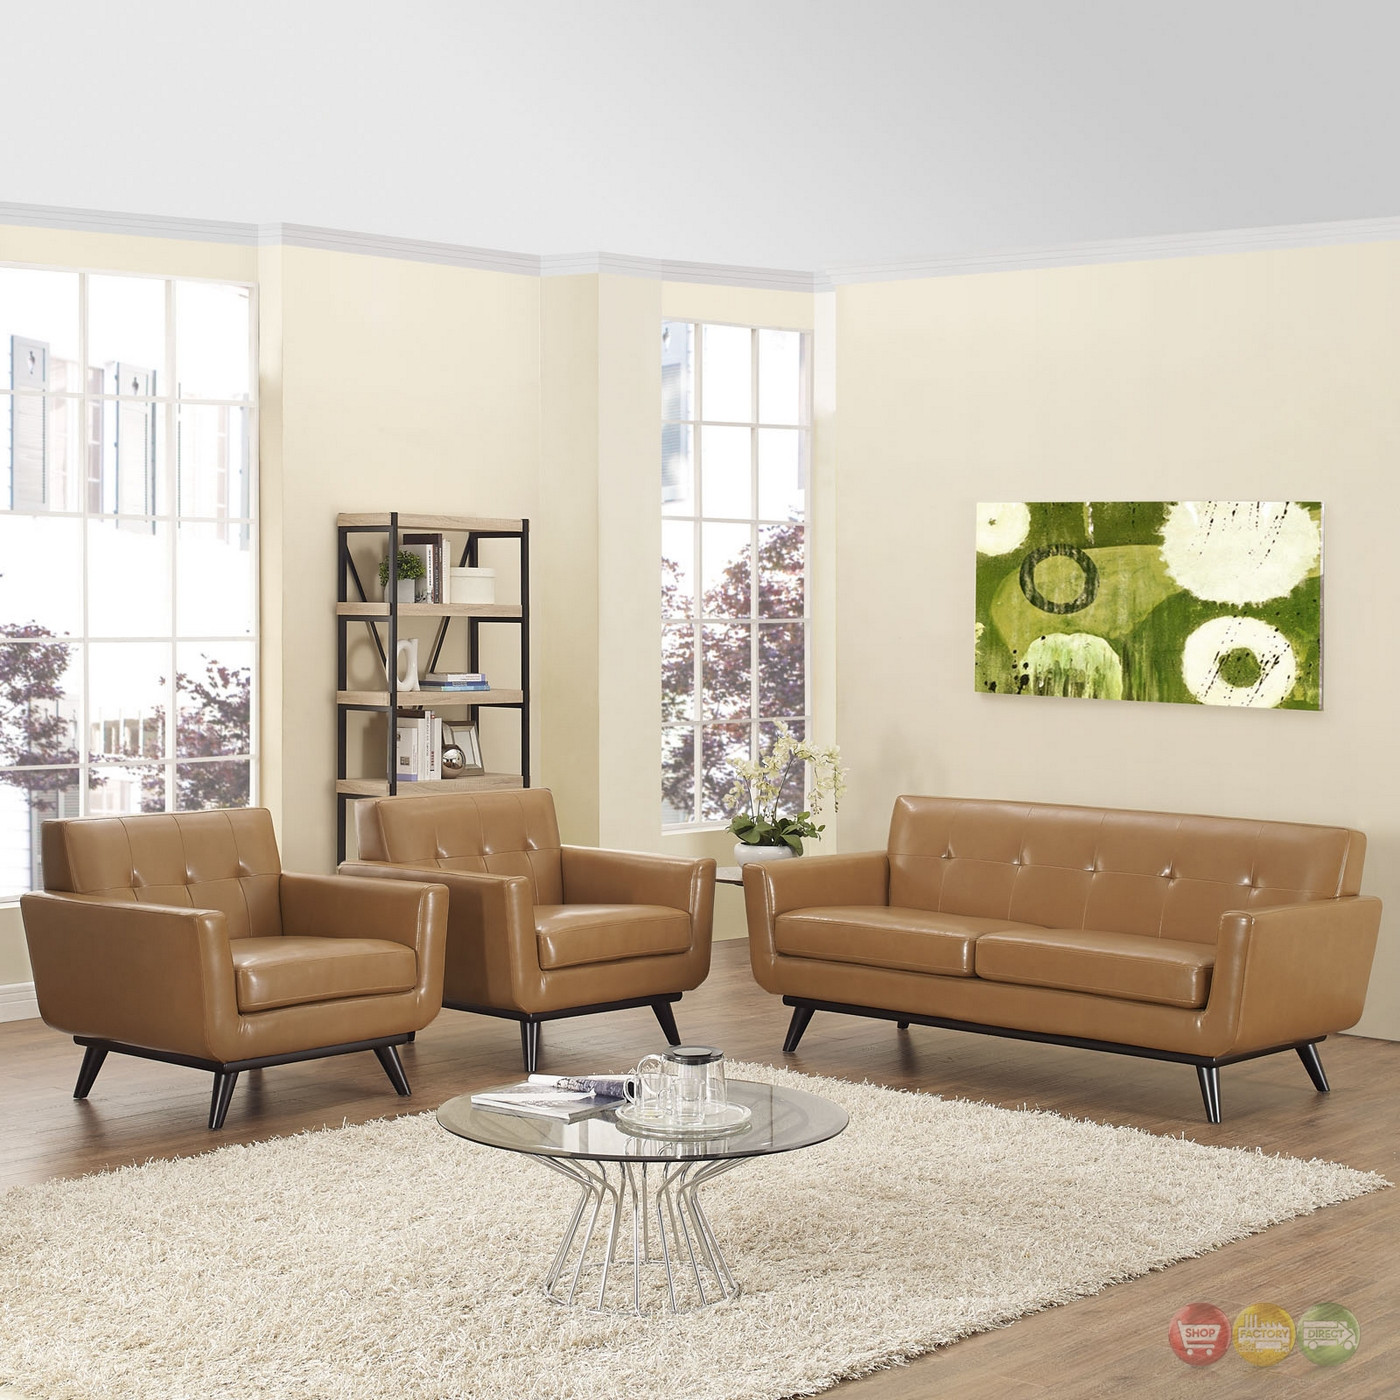 Modern Living Room Set
 Mid Century Modern Engage 3pc Button Tufted Leather Living